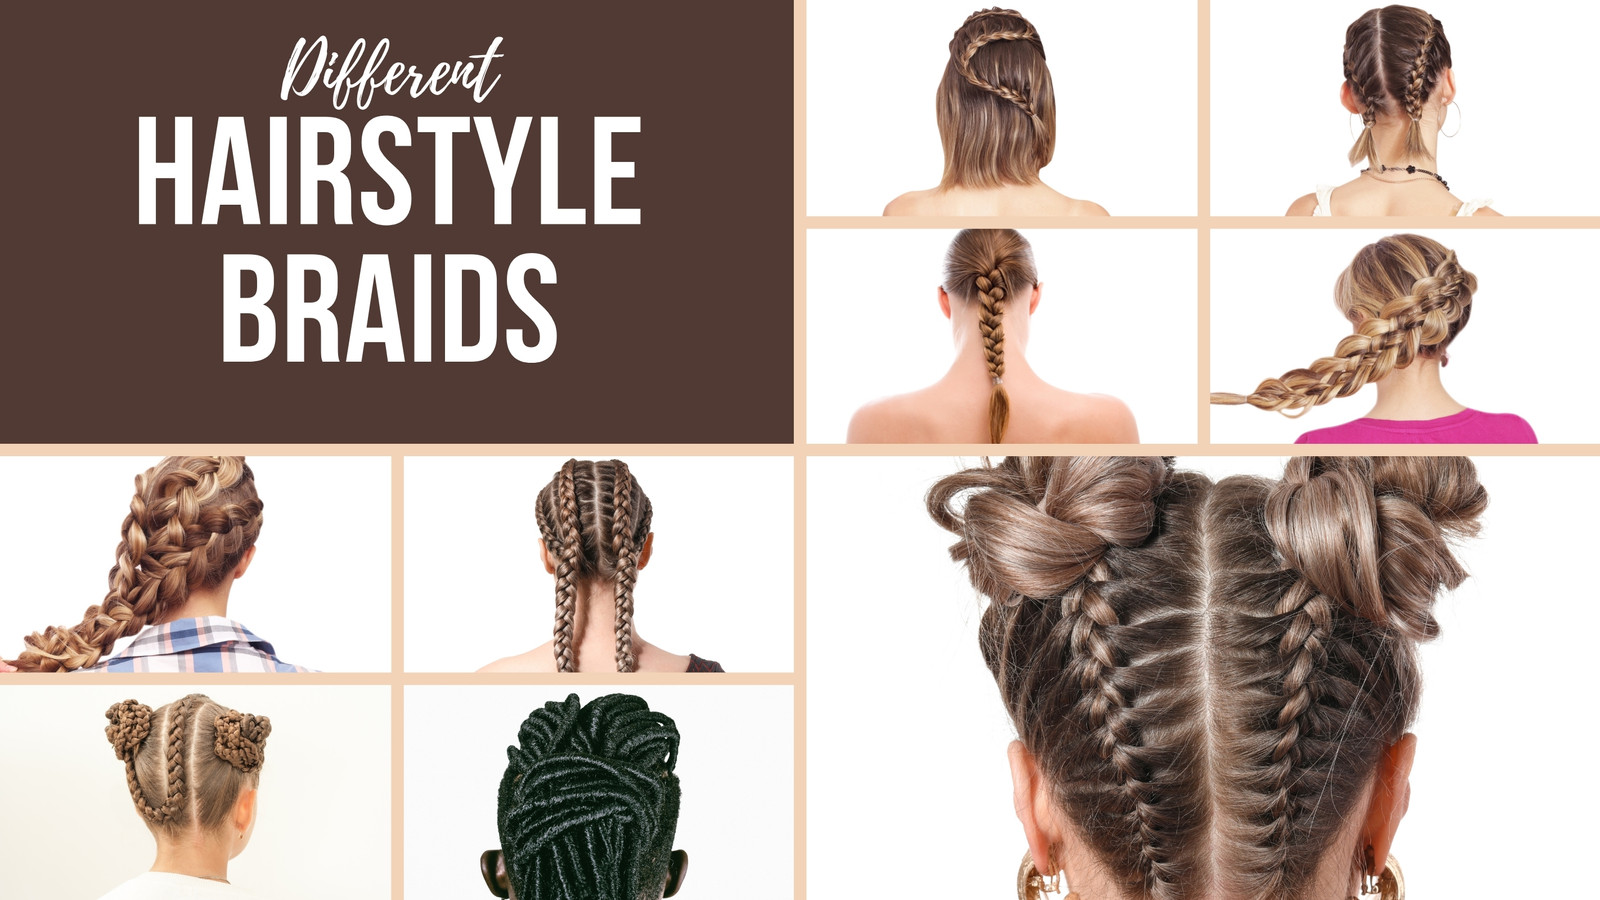 Page 21 - Free and customizable hair templates